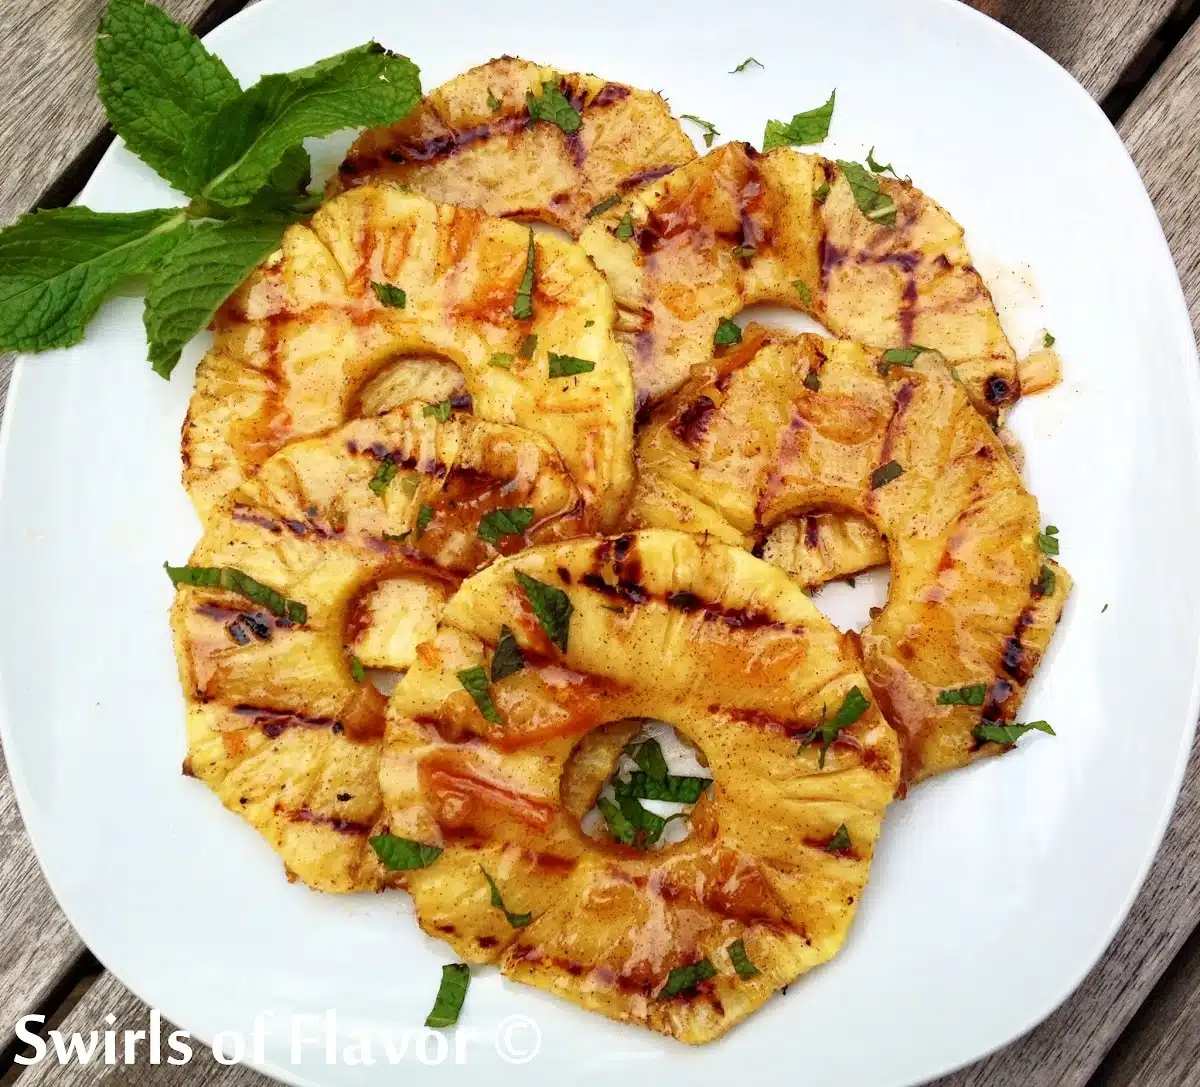 grilled pineapple slices on a plate